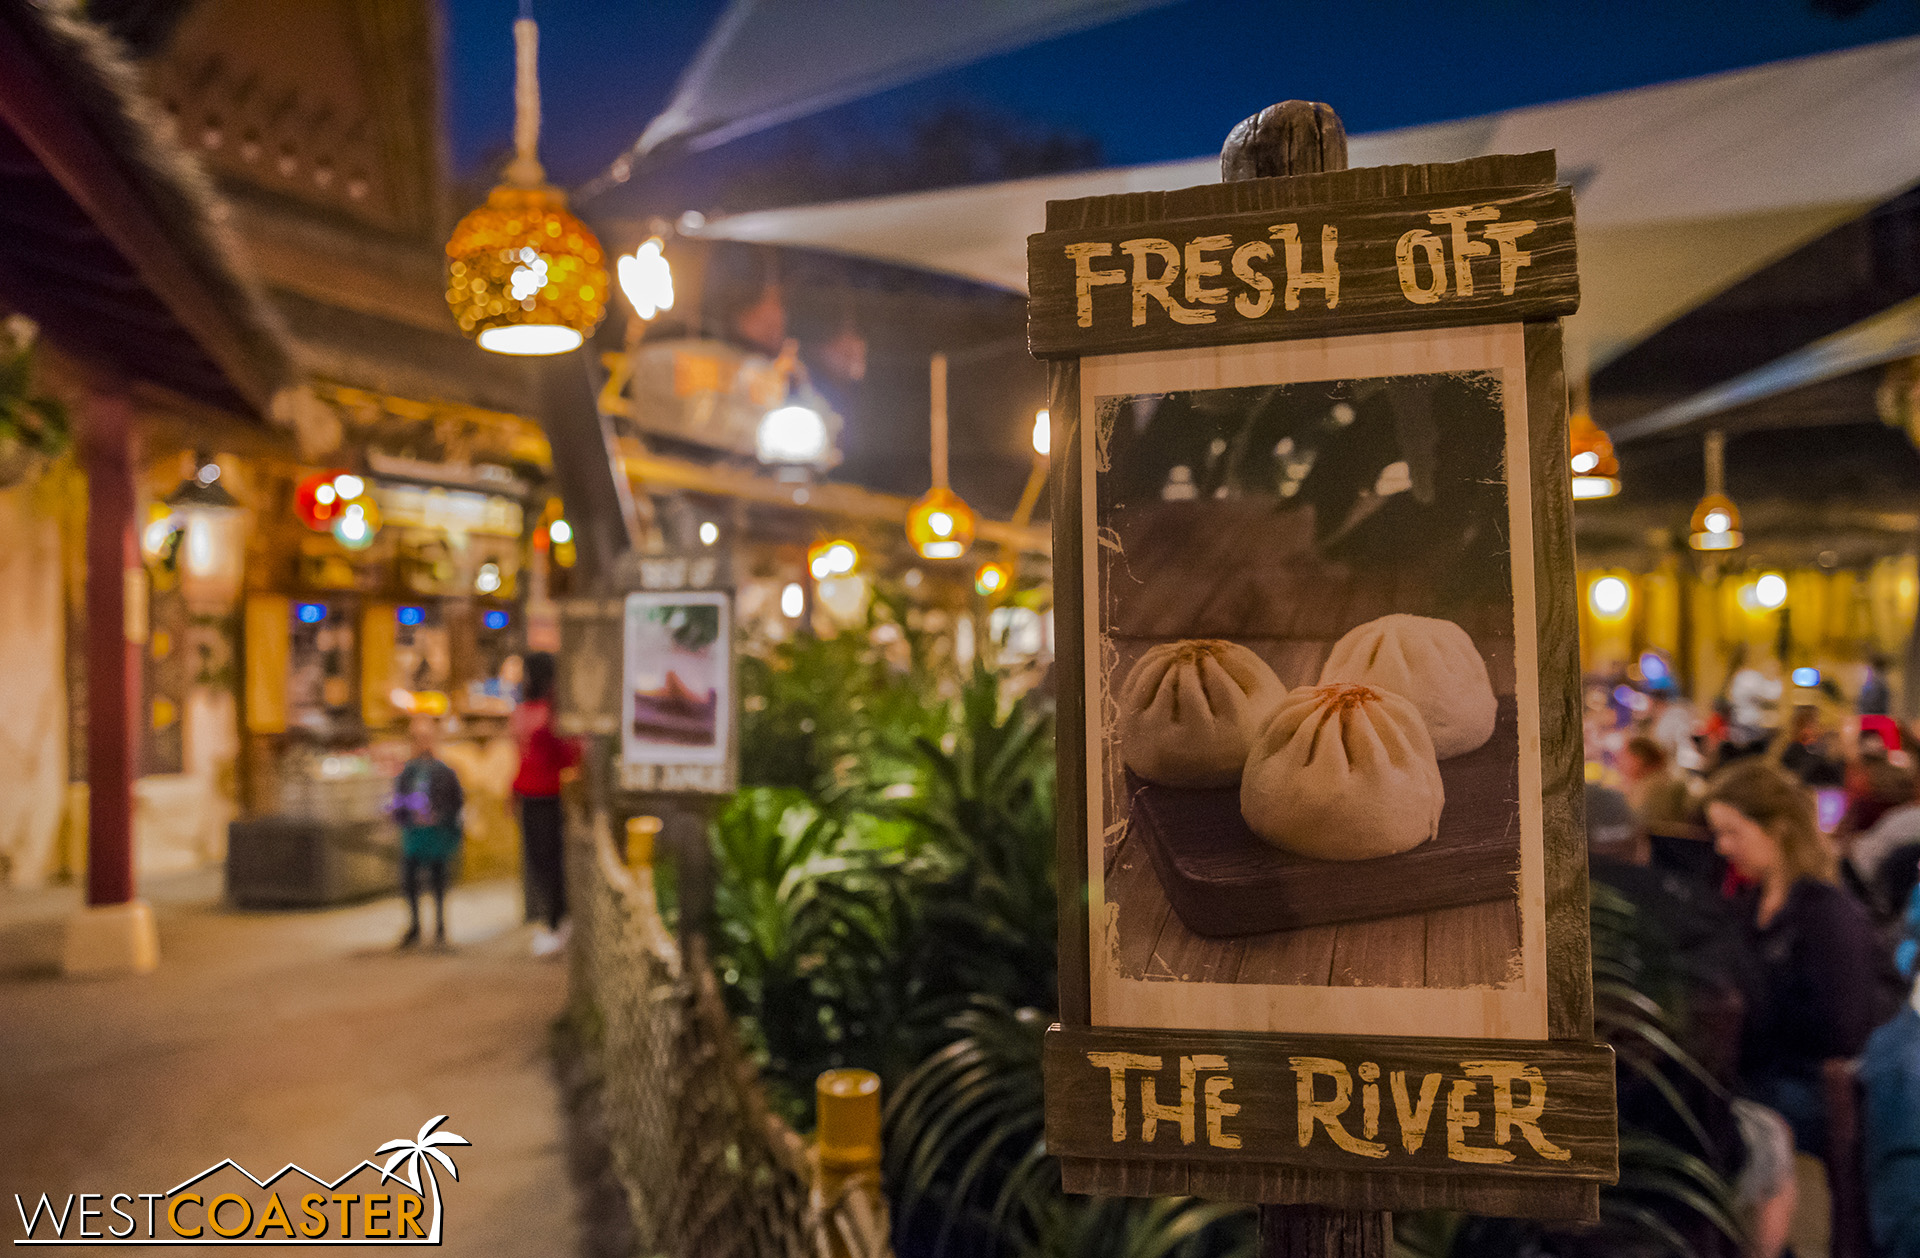  Heading into the food queue, guests are greeted by some signage promising delectable bites to be had. 